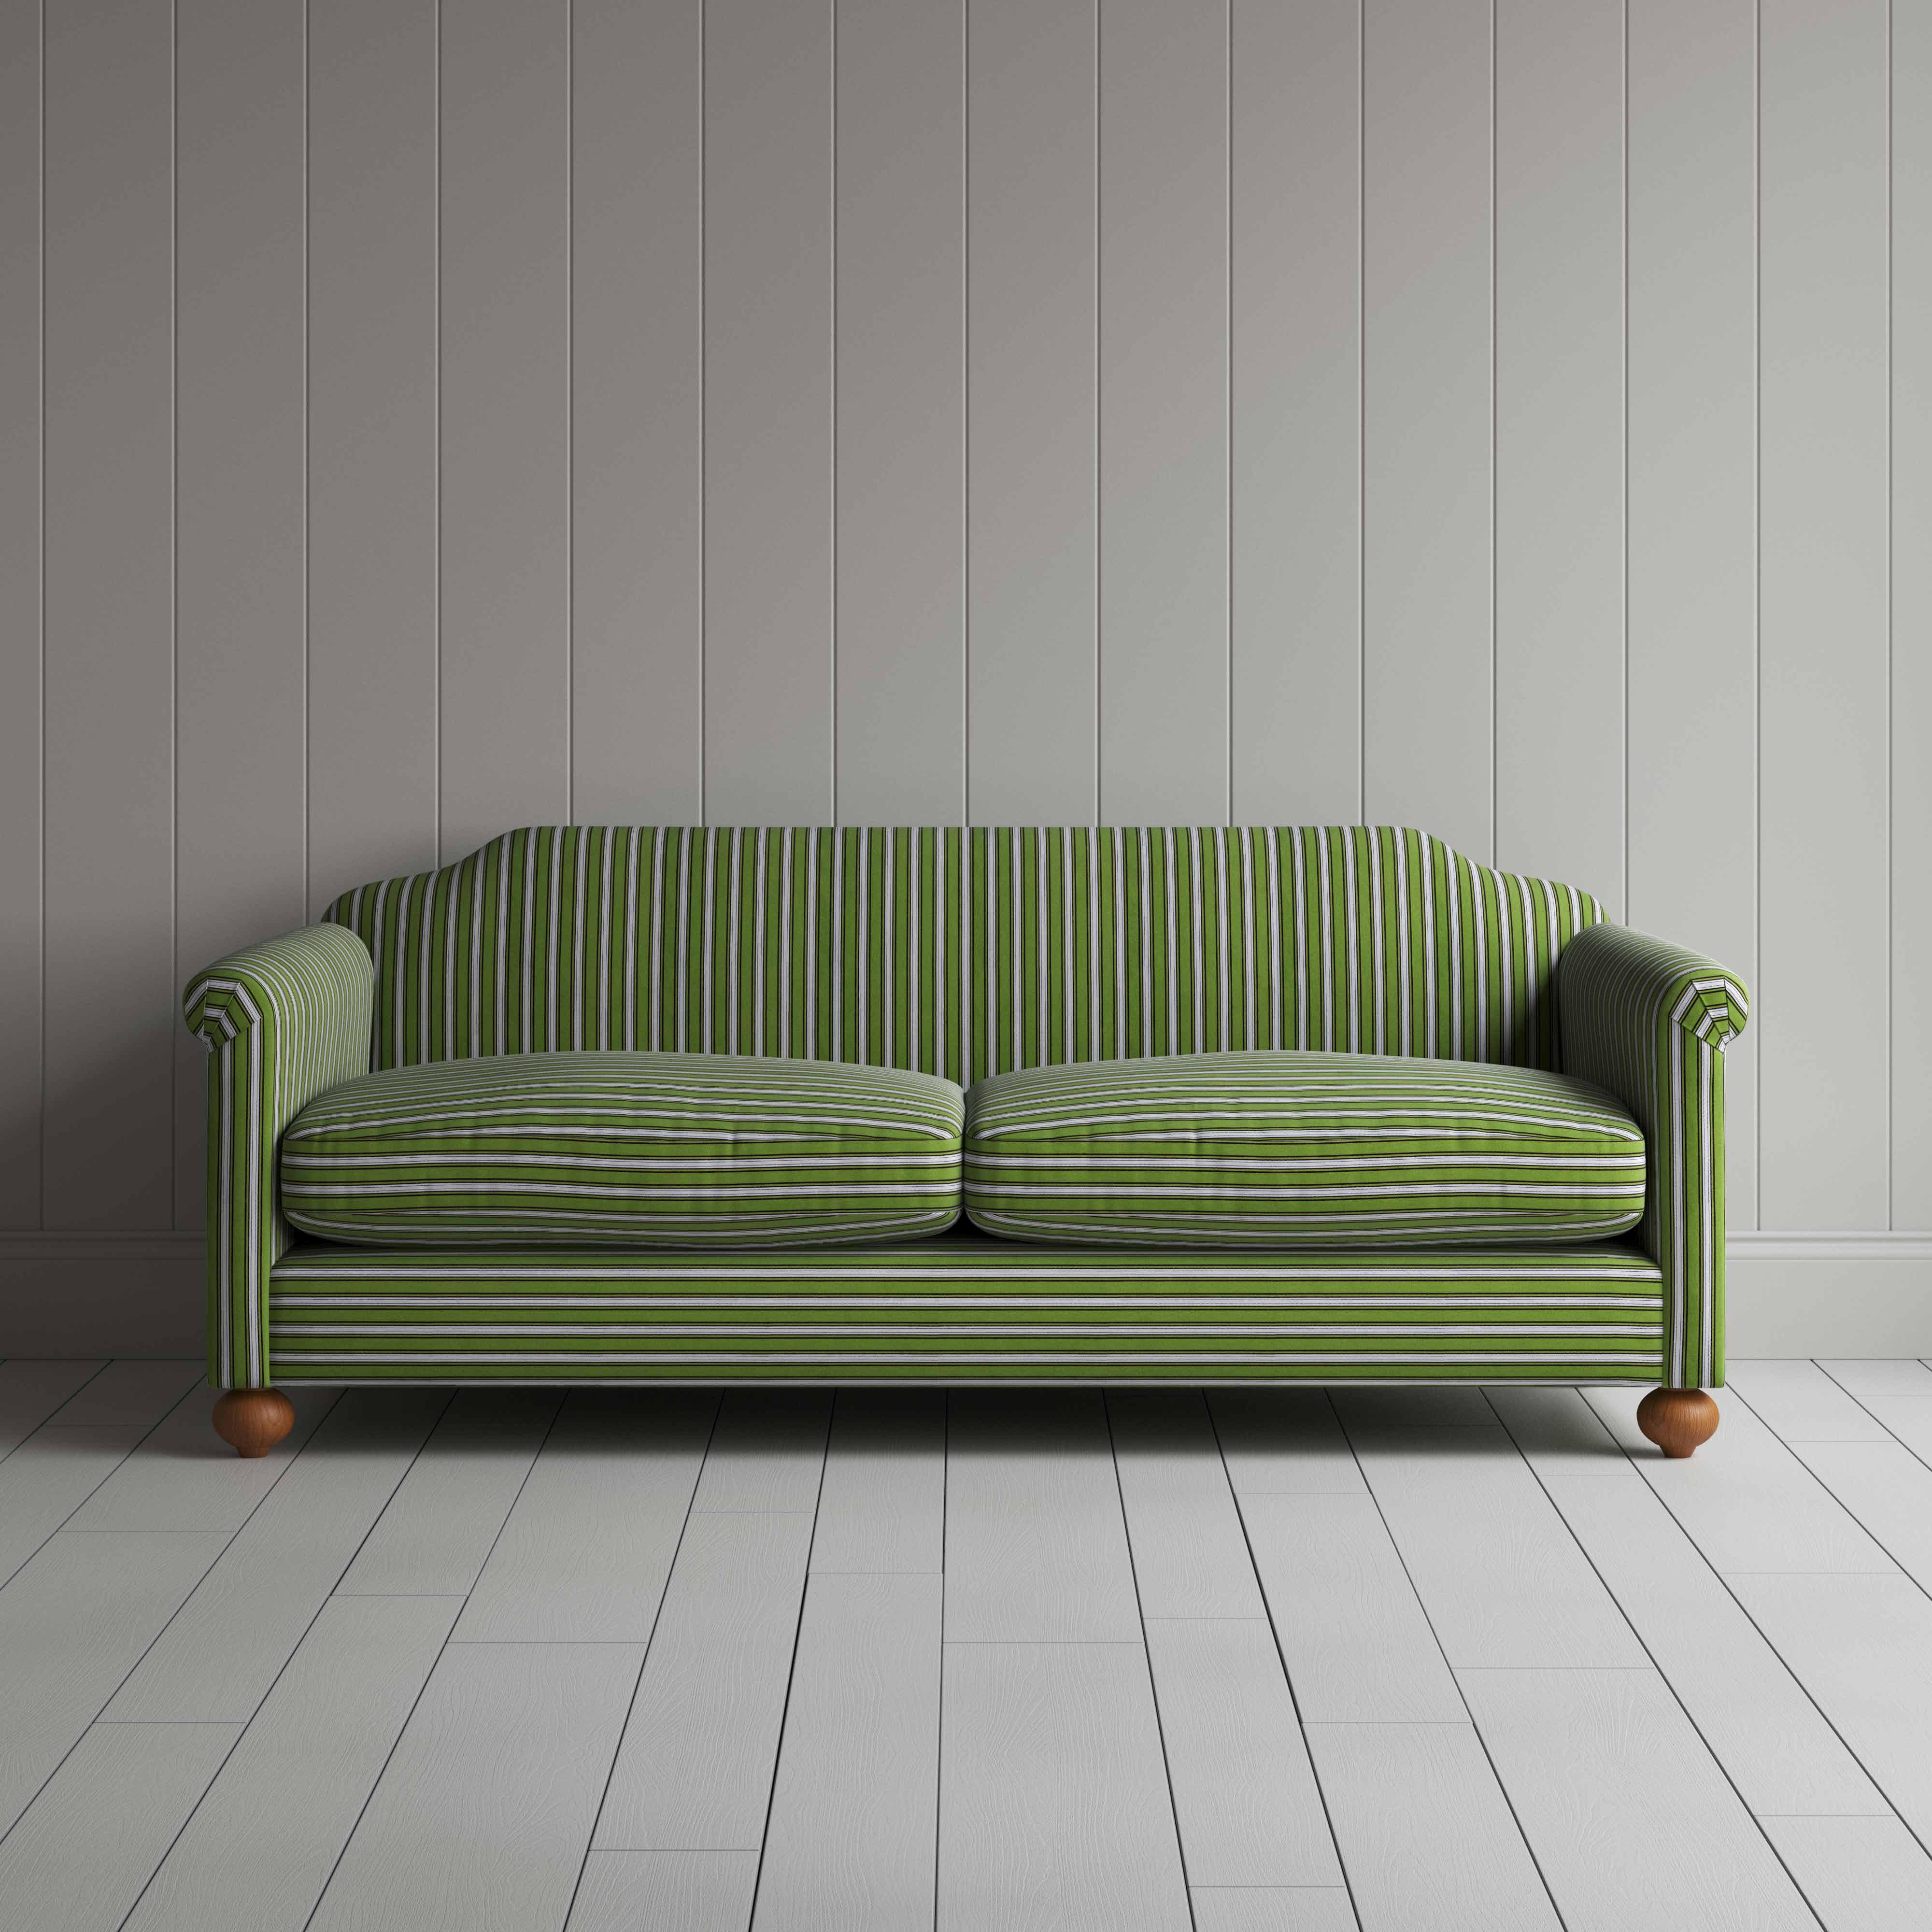  Dolittle 4 Seater Sofa in Colonnade Cotton, Green and Wine 